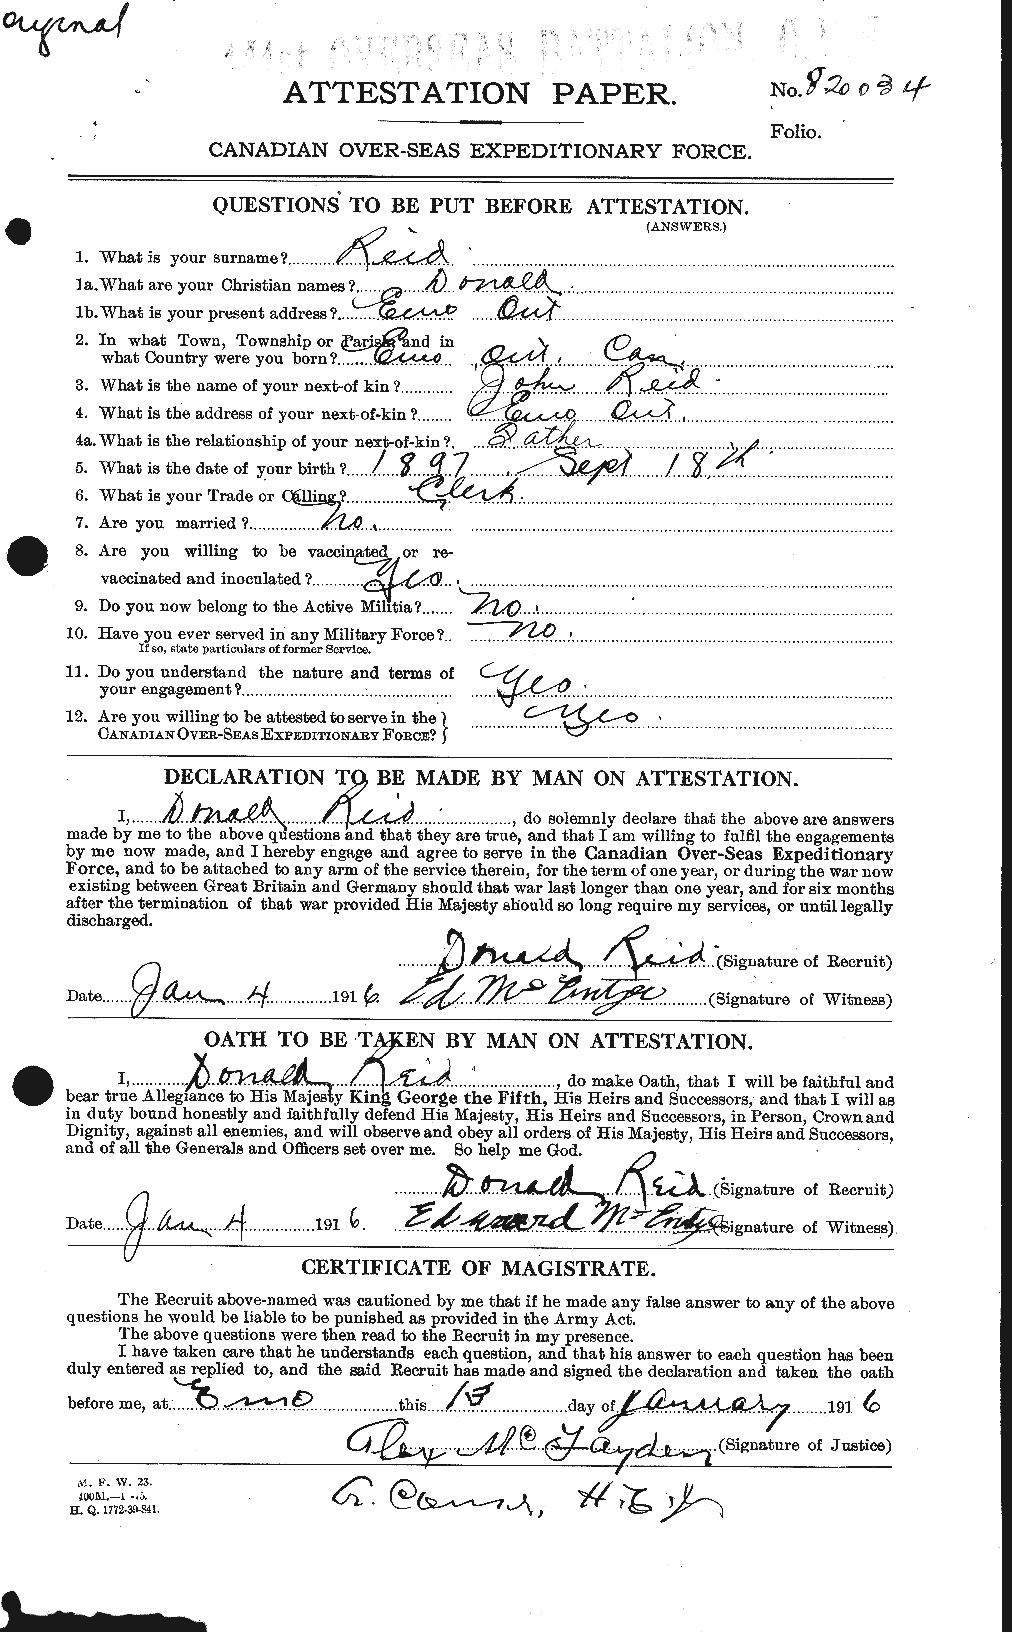 Personnel Records of the First World War - CEF 597957a